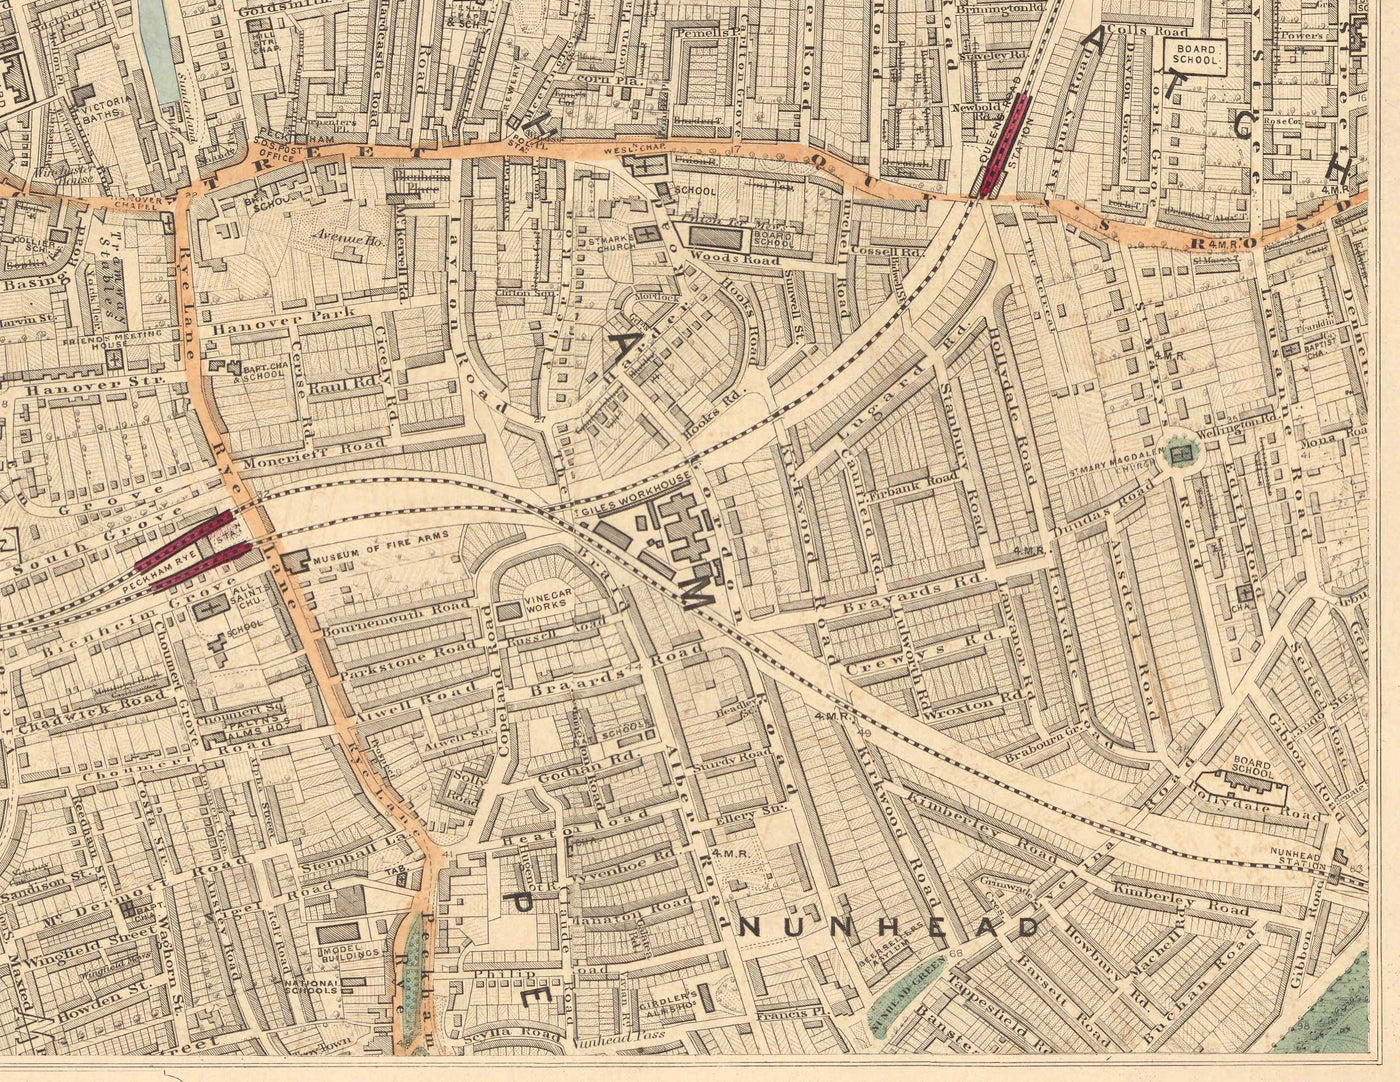 Old Colour Map of South London in 1891 - Camberwell, Peckham, Walworth, Nunhead, Old Kent Road - SE5, SE17, SE15, SE1, SE16